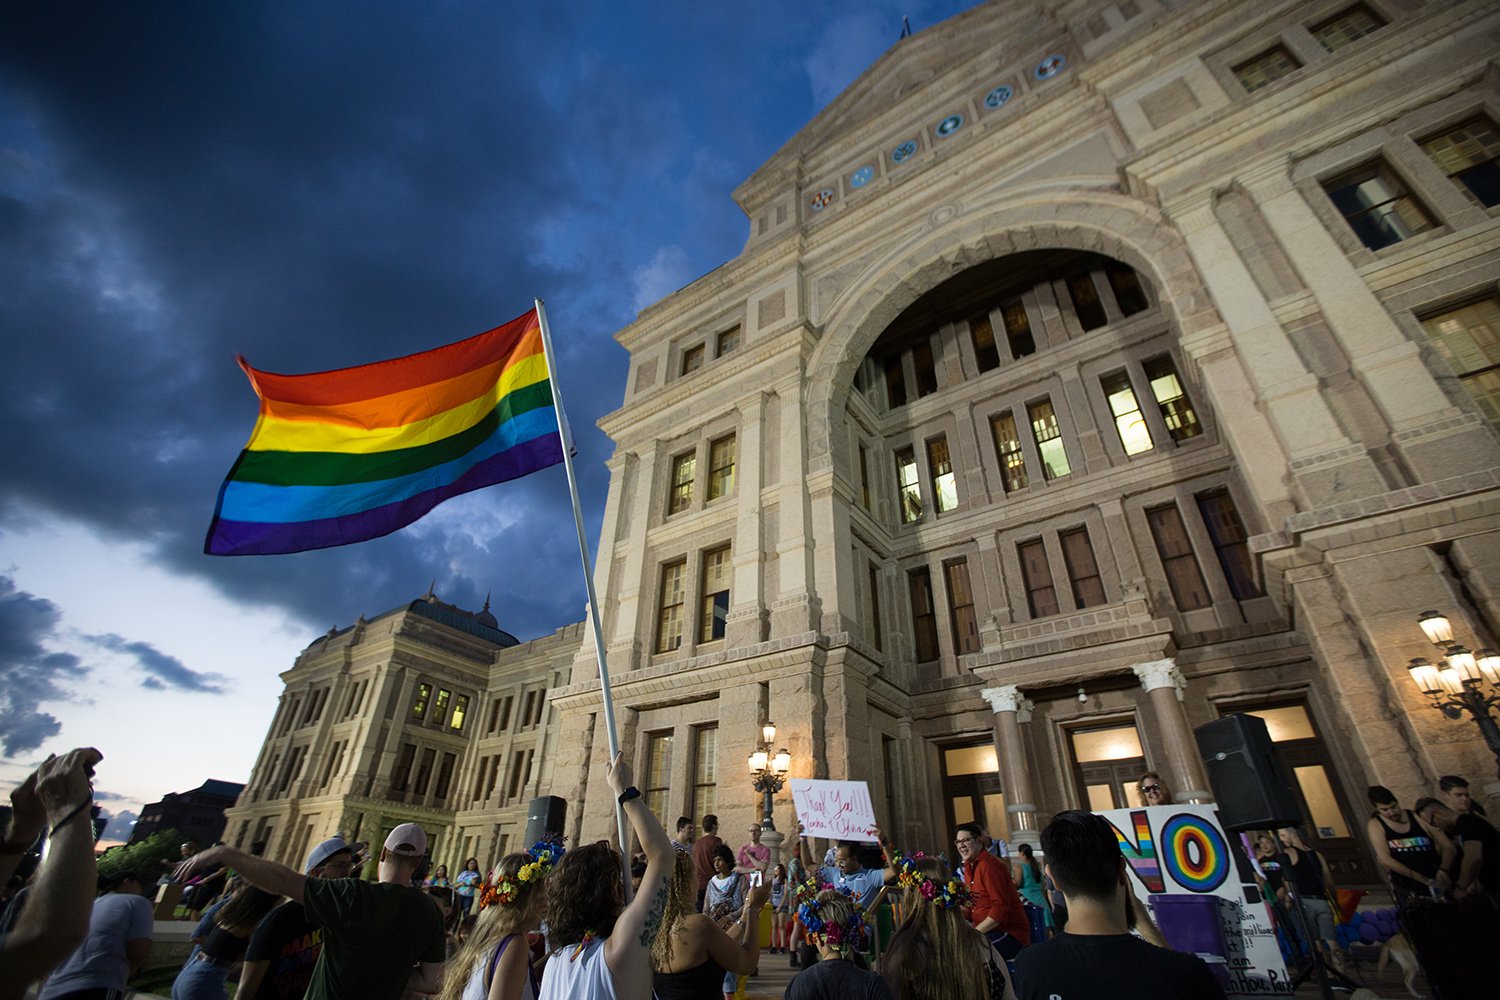 Demonstrators gather on the steps of the state Capitol on June 28, 2017 to celebrate the anniversary of the 1969 Stonewall riots.